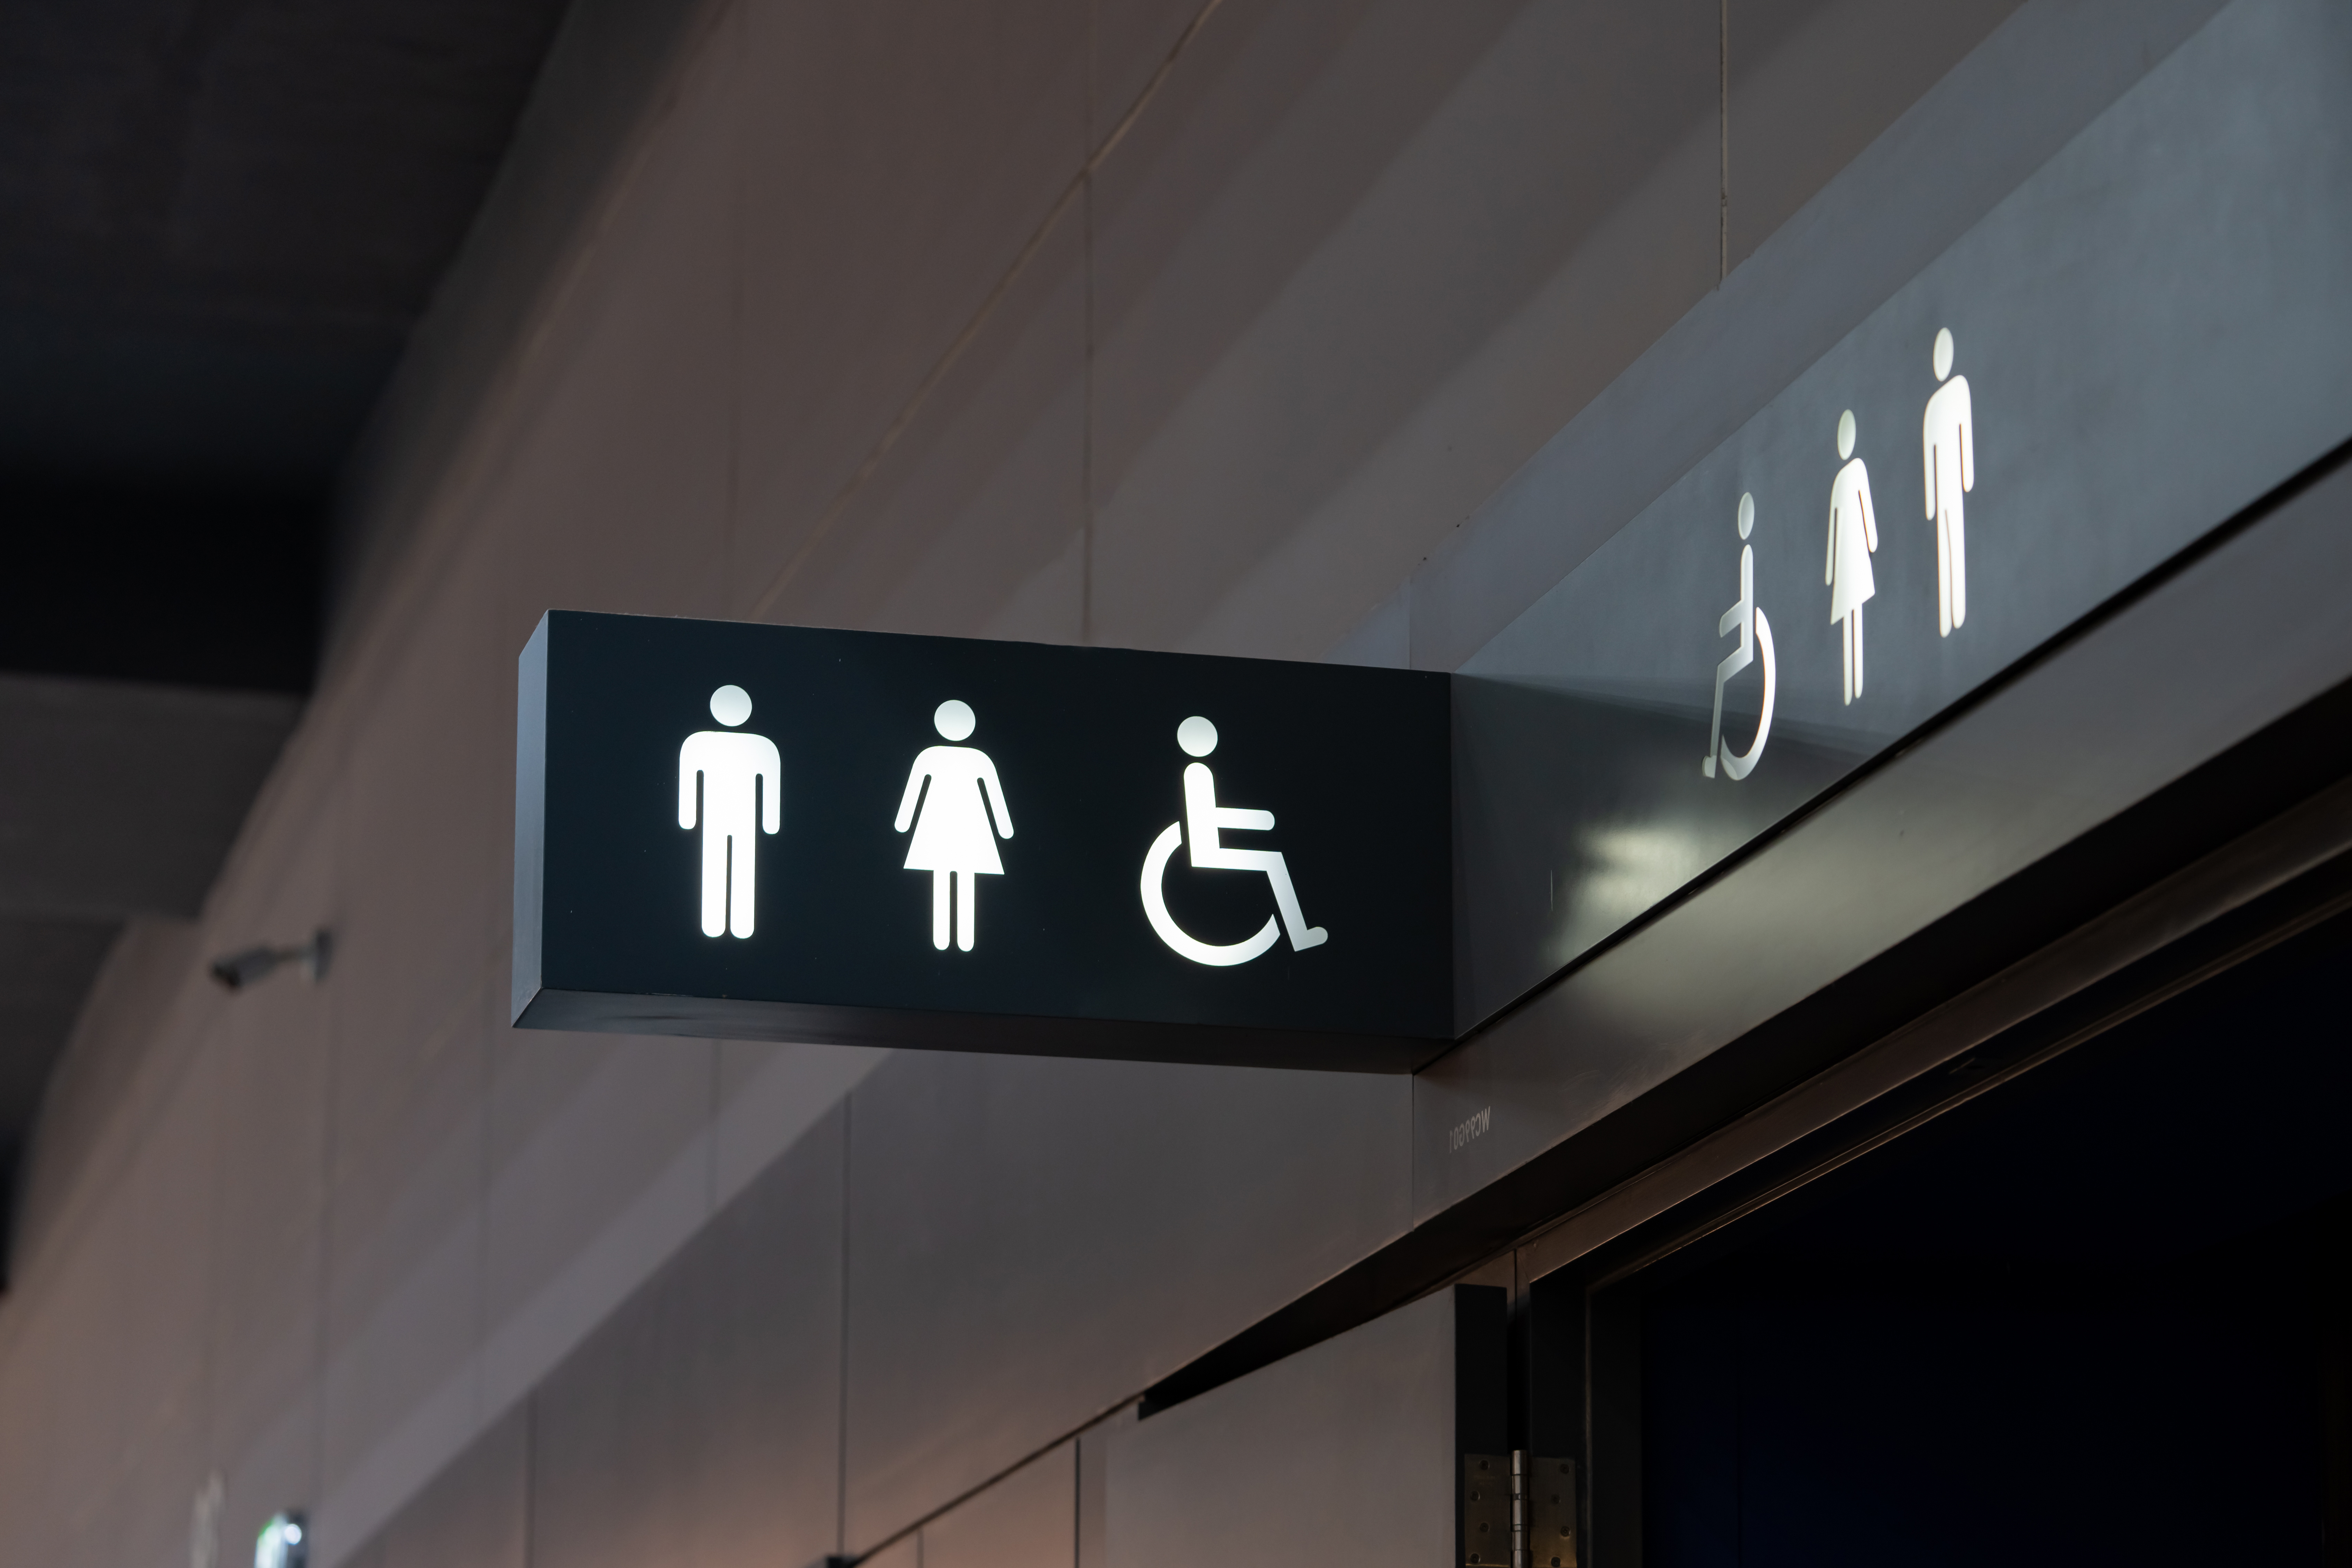 An image of a bathroom sign indicating that there are accessible bathrooms for people with disabilities.